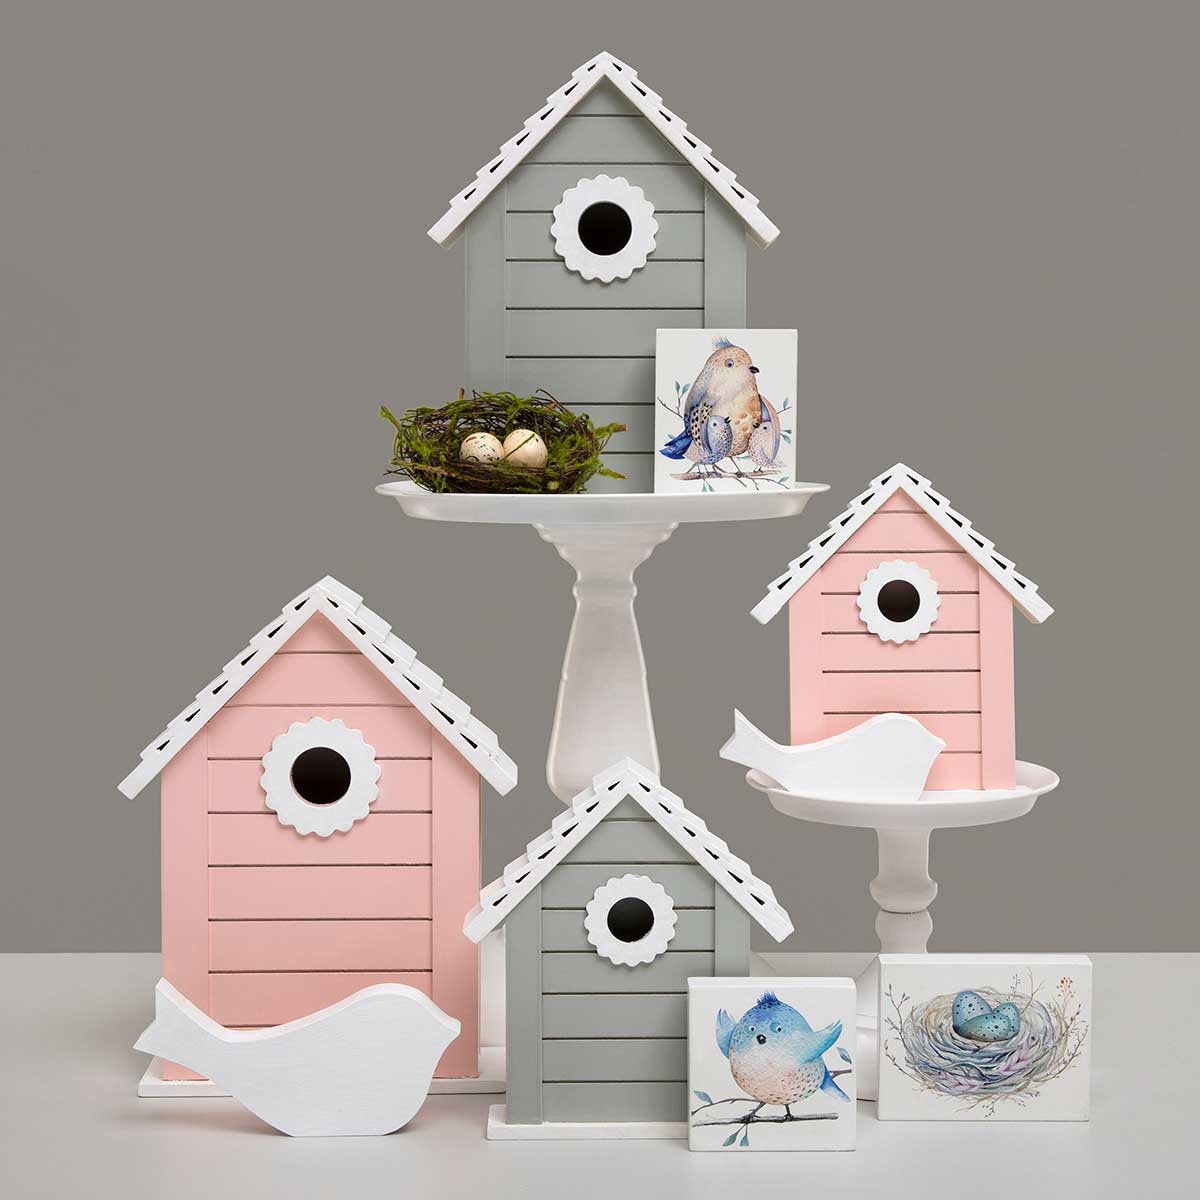 b50 BIRDHOUSE SLAT GREY SMALL 6IN X 1.5IN X 7IN WOOD - Click Image to Close